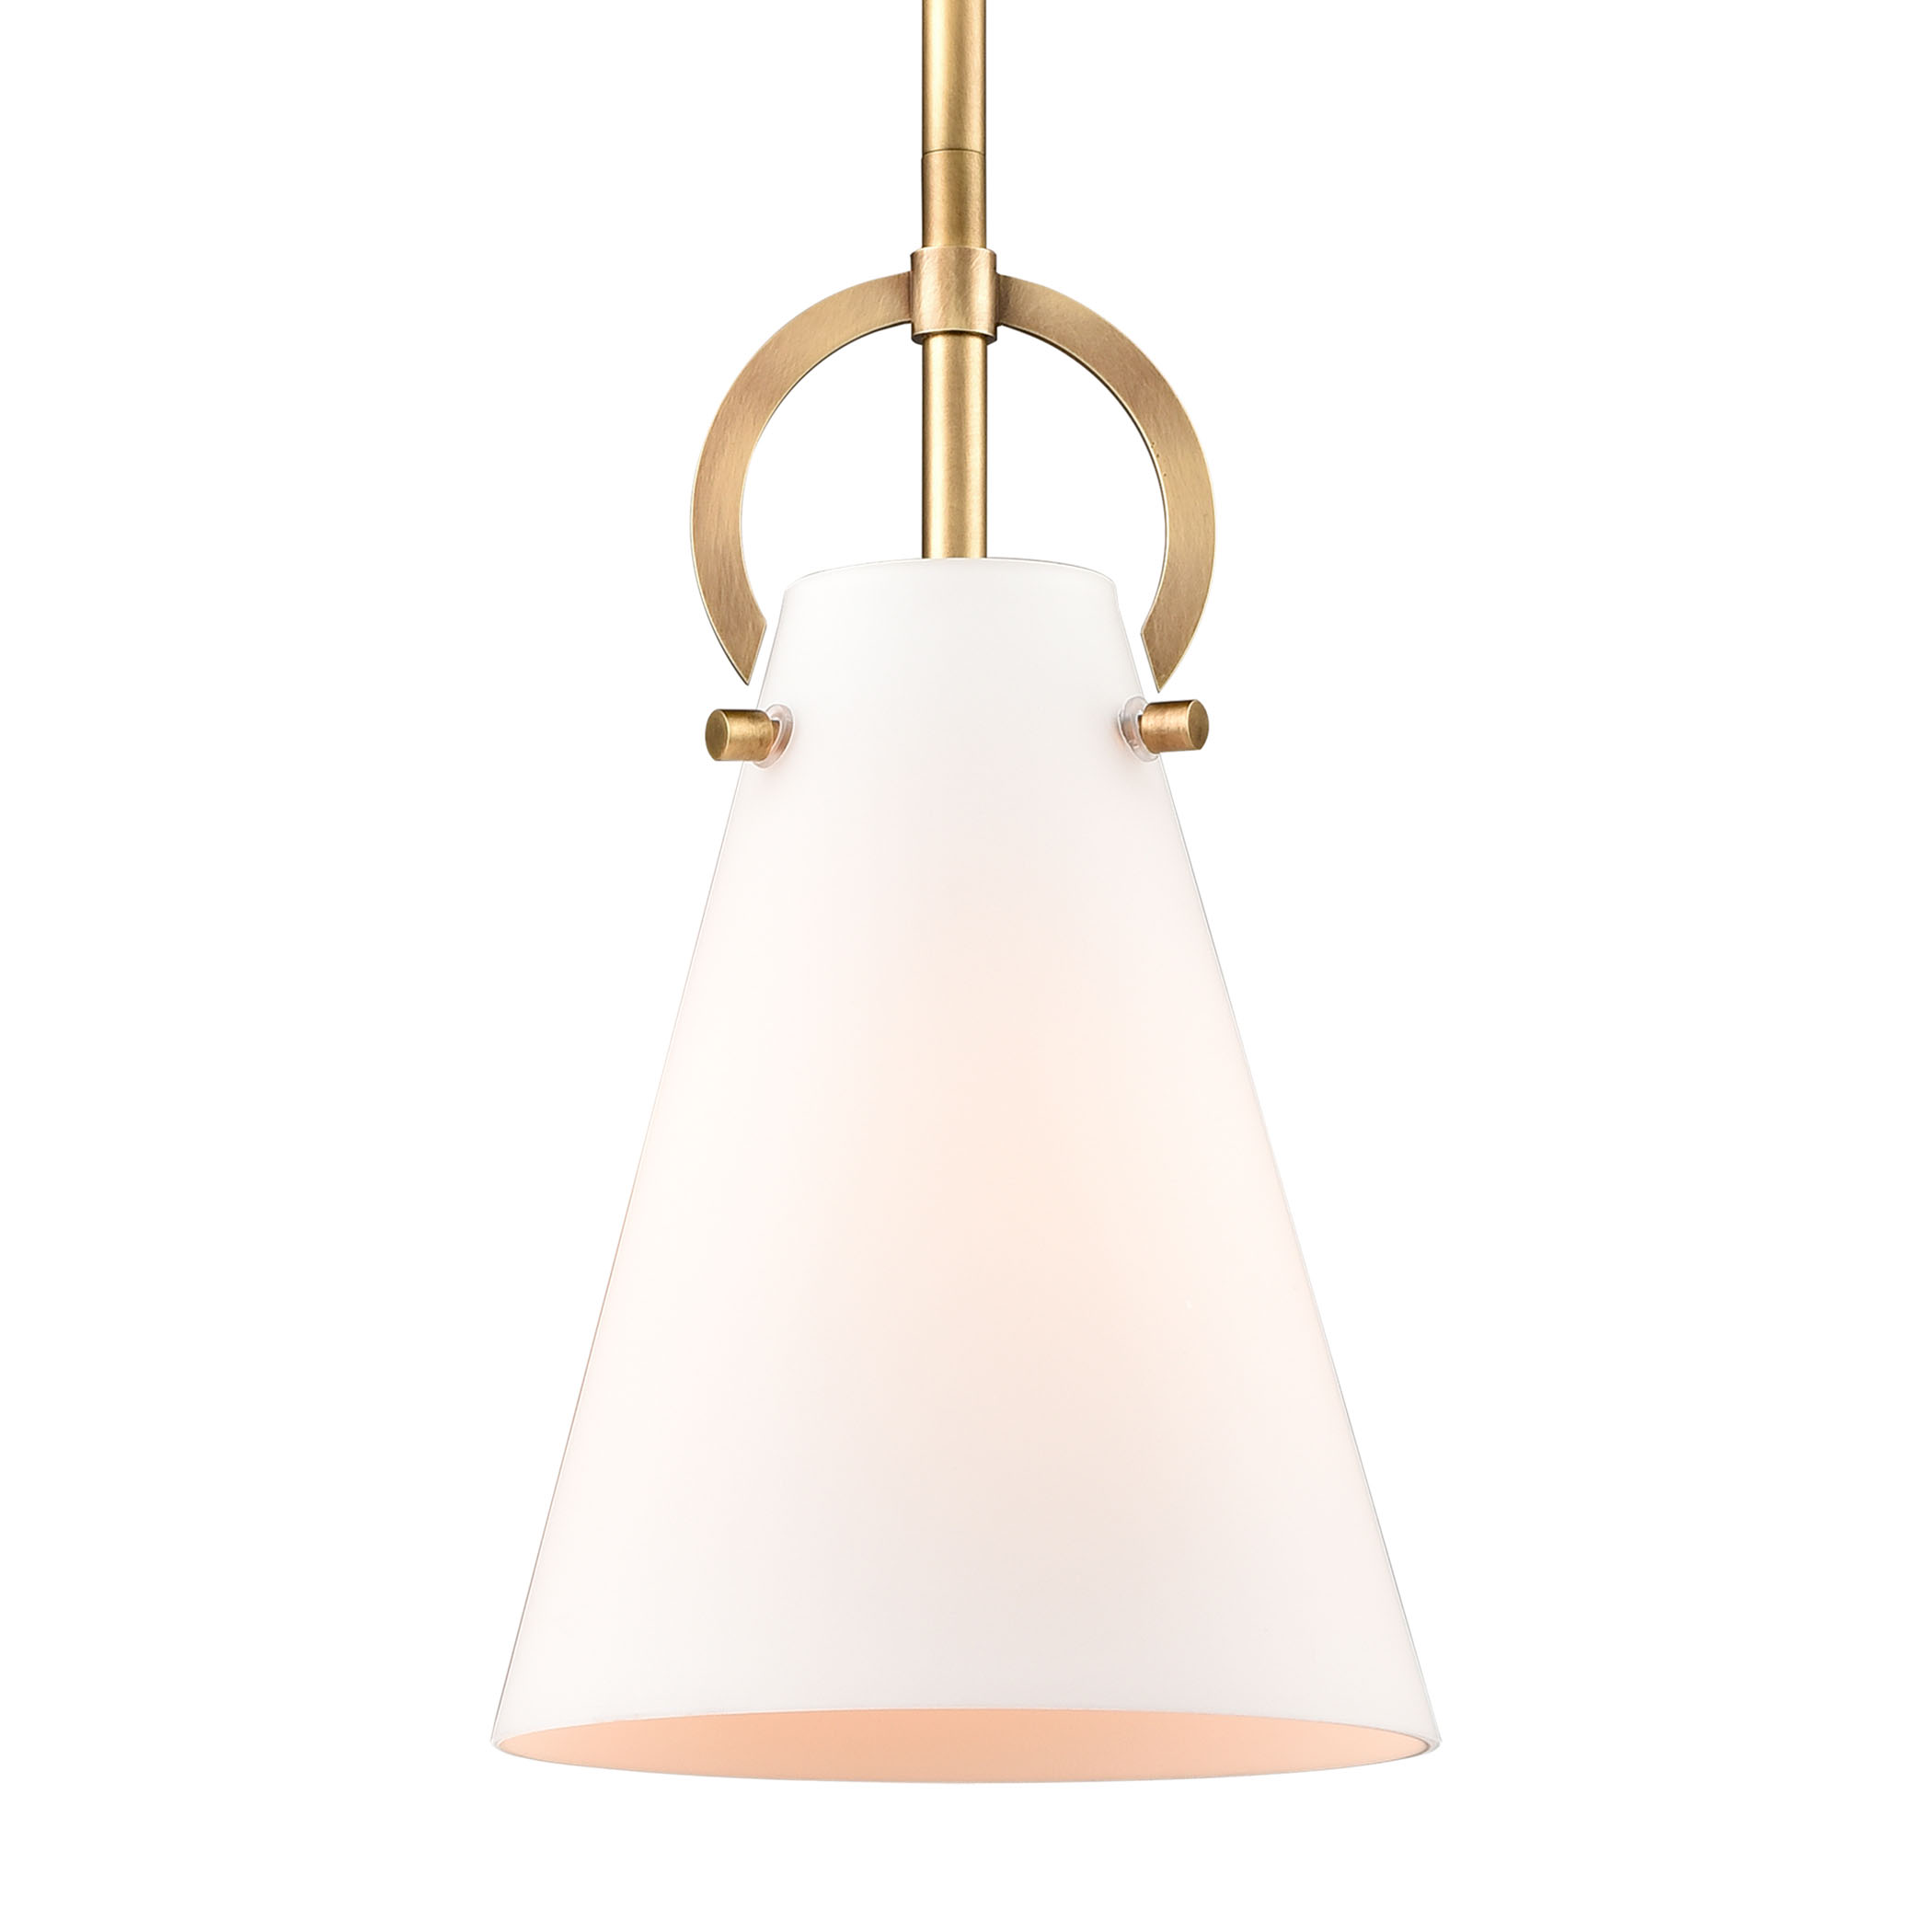 Elk Home 7-Inch Wide Gabby Mini Pendant, Modern/Contemporary, Brass - image 4 of 4